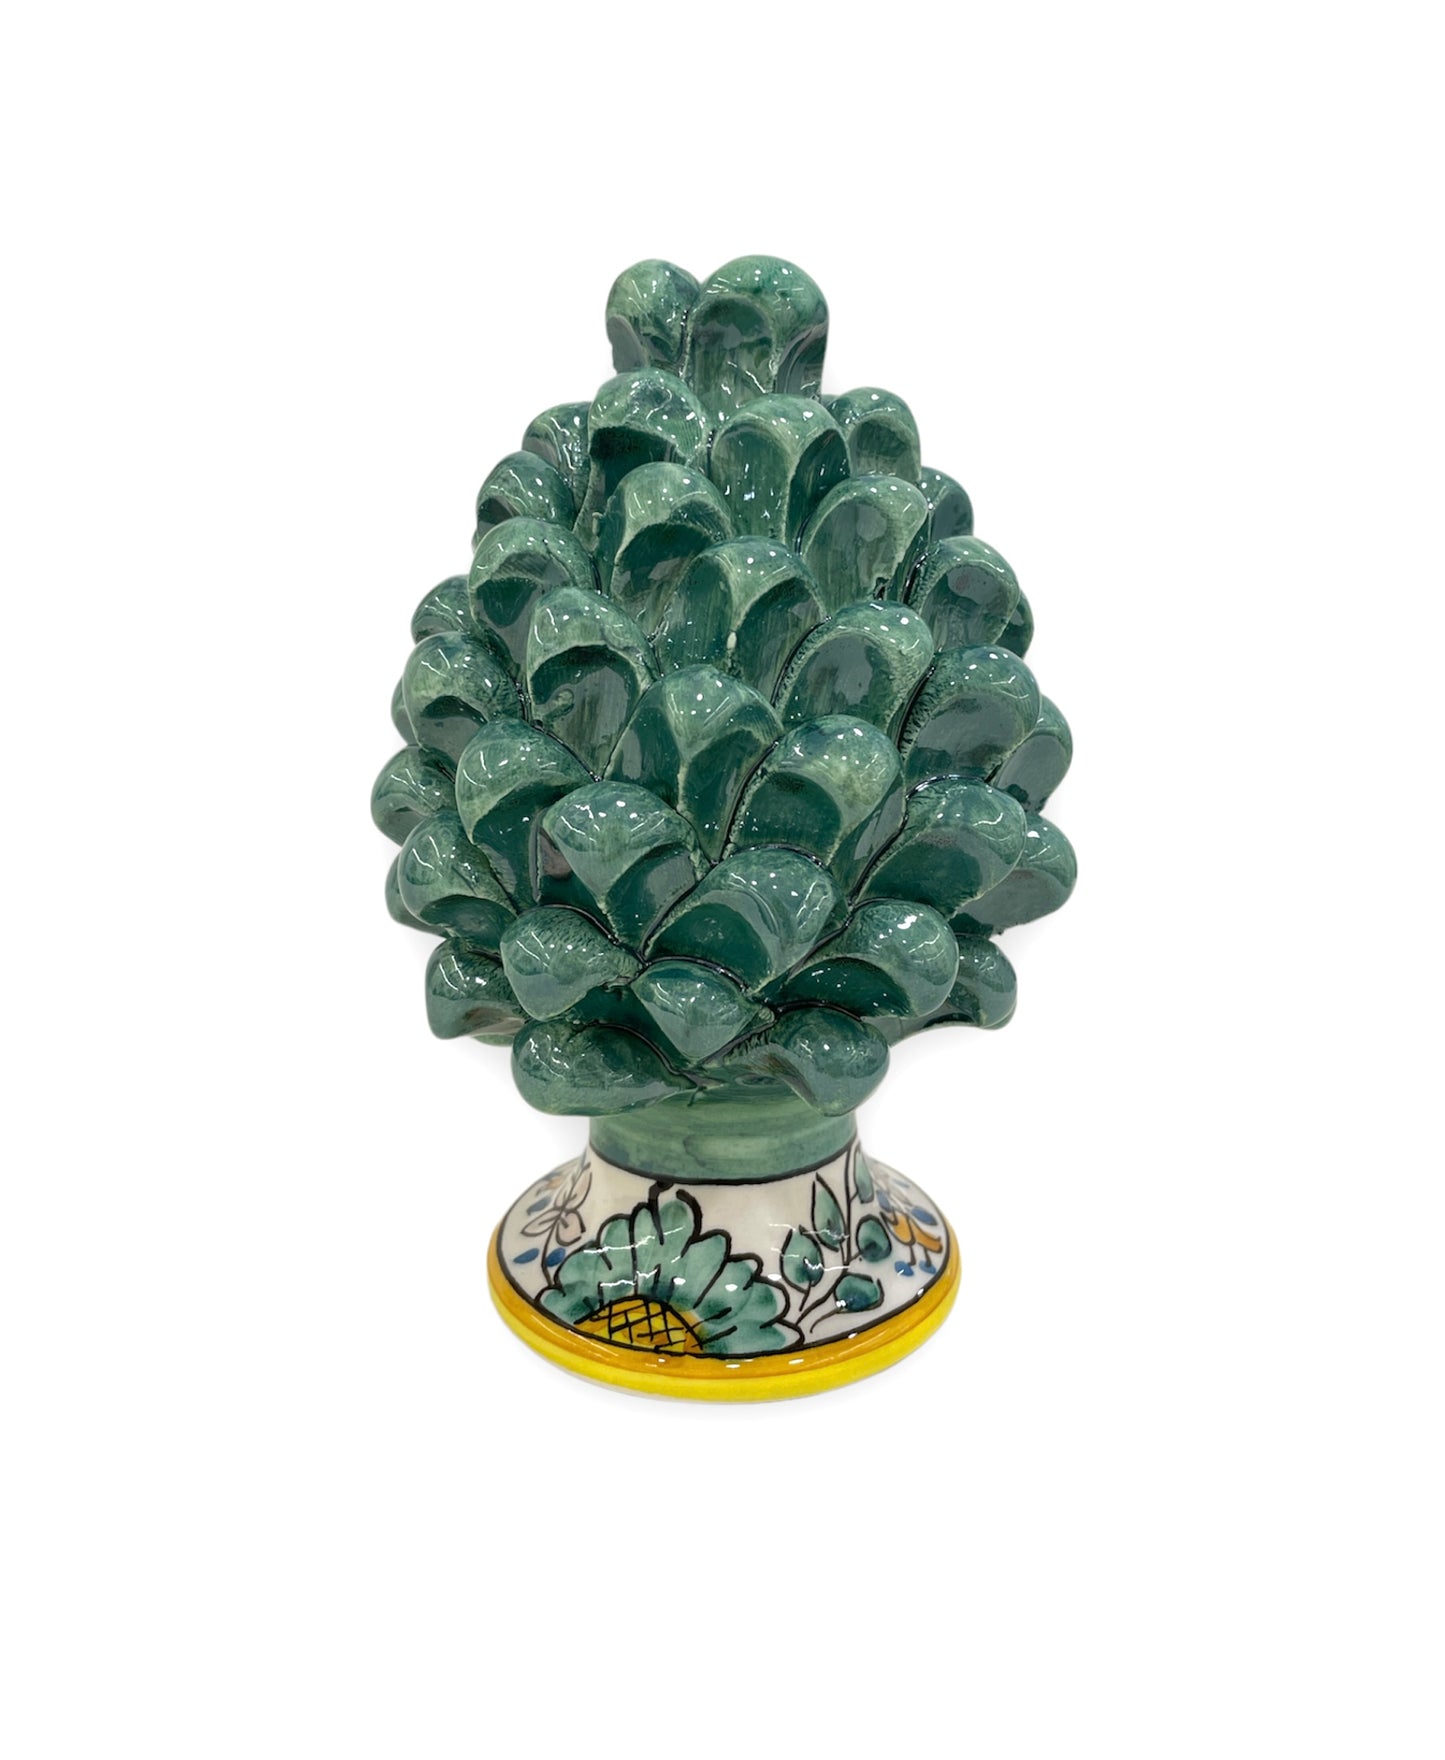 Green Pine Cone With Decorated Base